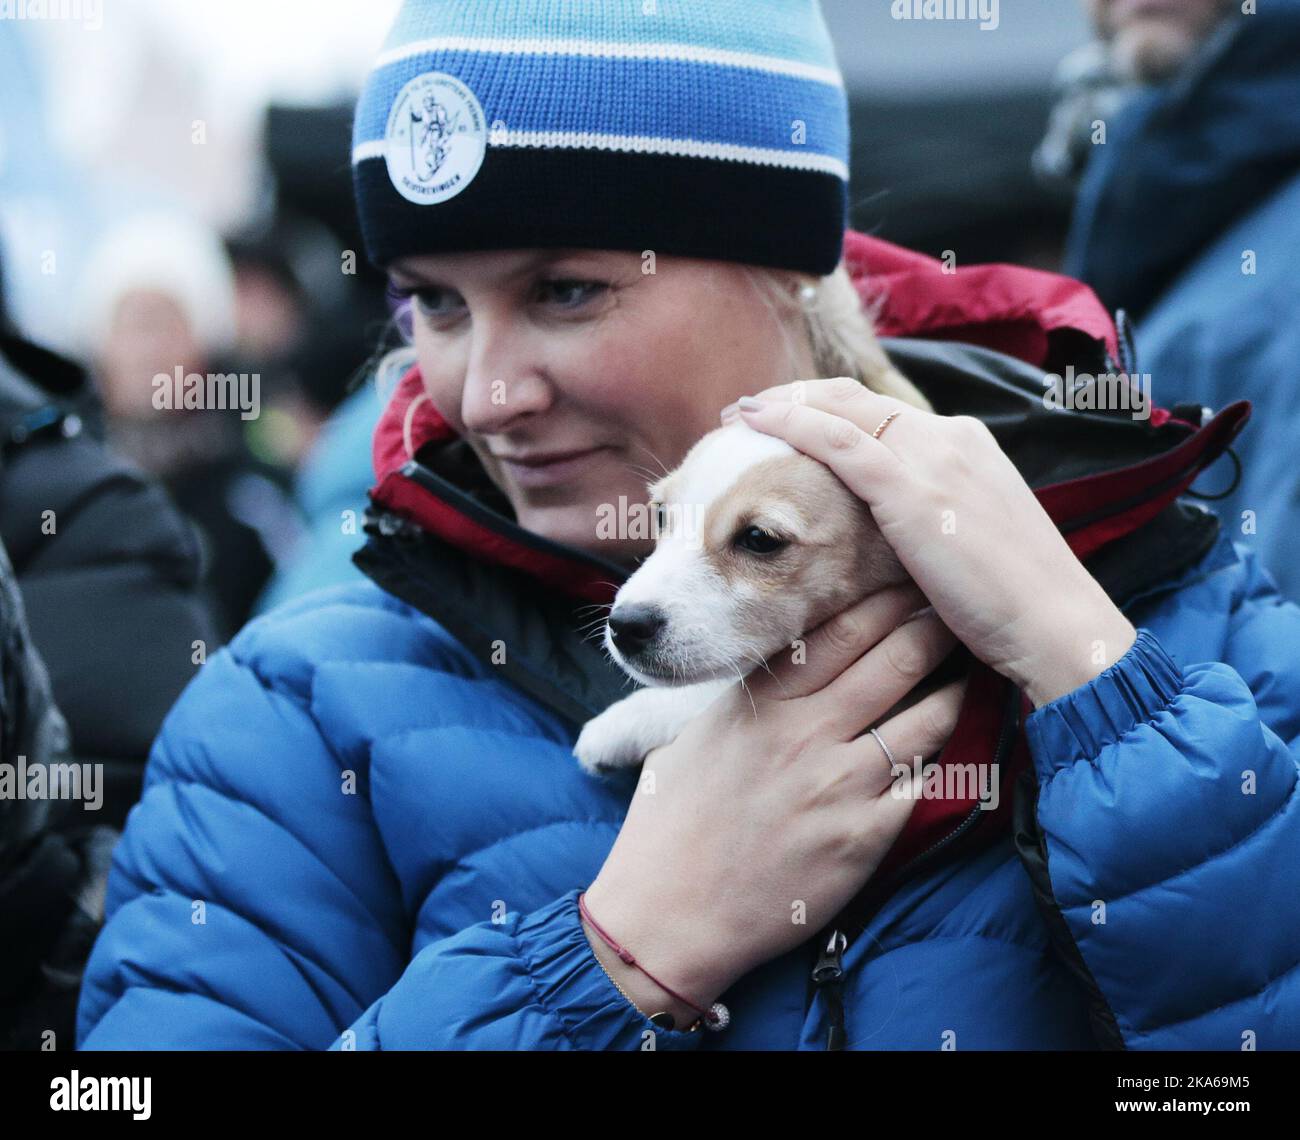 Oslo 20150113. The Royal Crown Prince Couple visit Toyenparken in Oslo on Tuesday for the opening of the Outdoor Recreation Year 2015 (Friluftlivets aar). 1600 children an youth attended the opening. Here puppy 'Toeffen' owned by mayor Fabian Stang receives the royal touch of the Crown Princess Mette-Marit. Photo: Lise Aaserud / NTB scanpix  Stock Photo